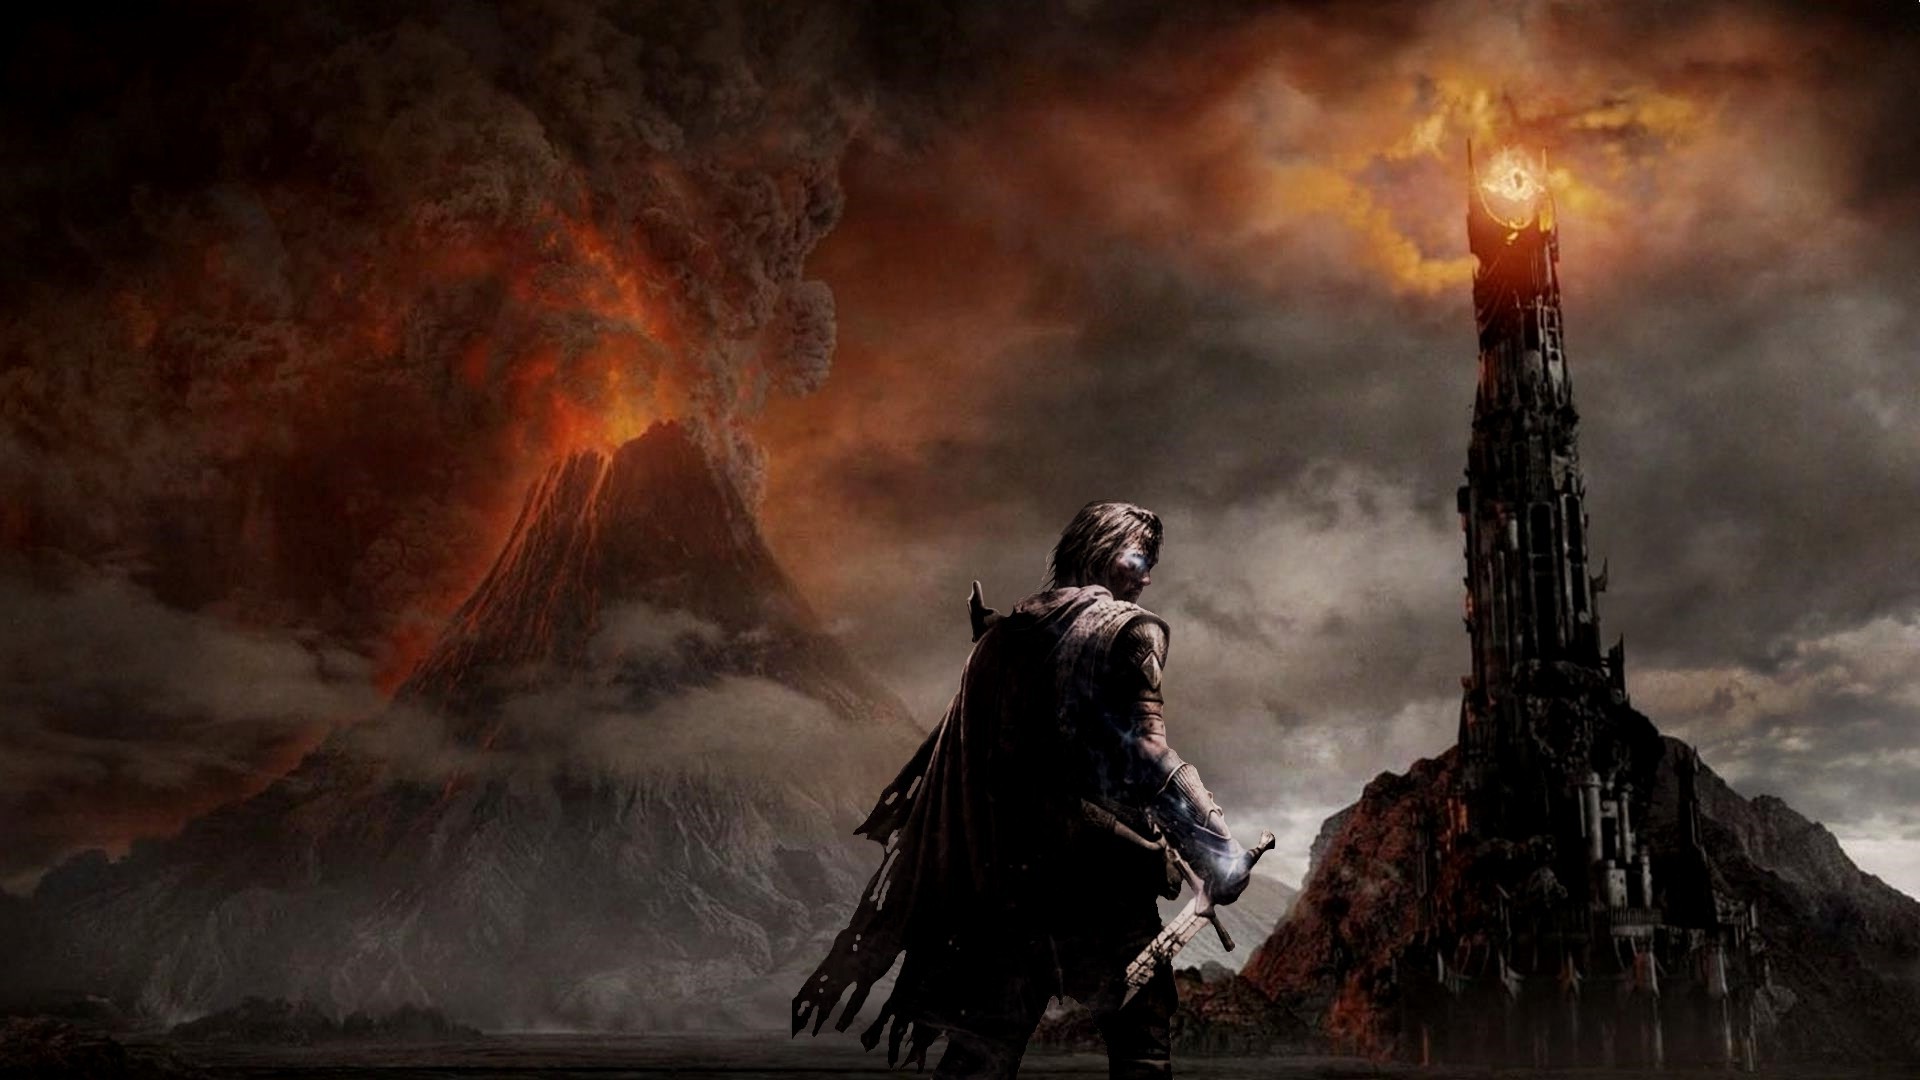 Shadow Of Mordor, Mordor, The Eye Of Sauron, Mountain, Lava, The Lord Of The Rings, DeviantArt Wallpaper